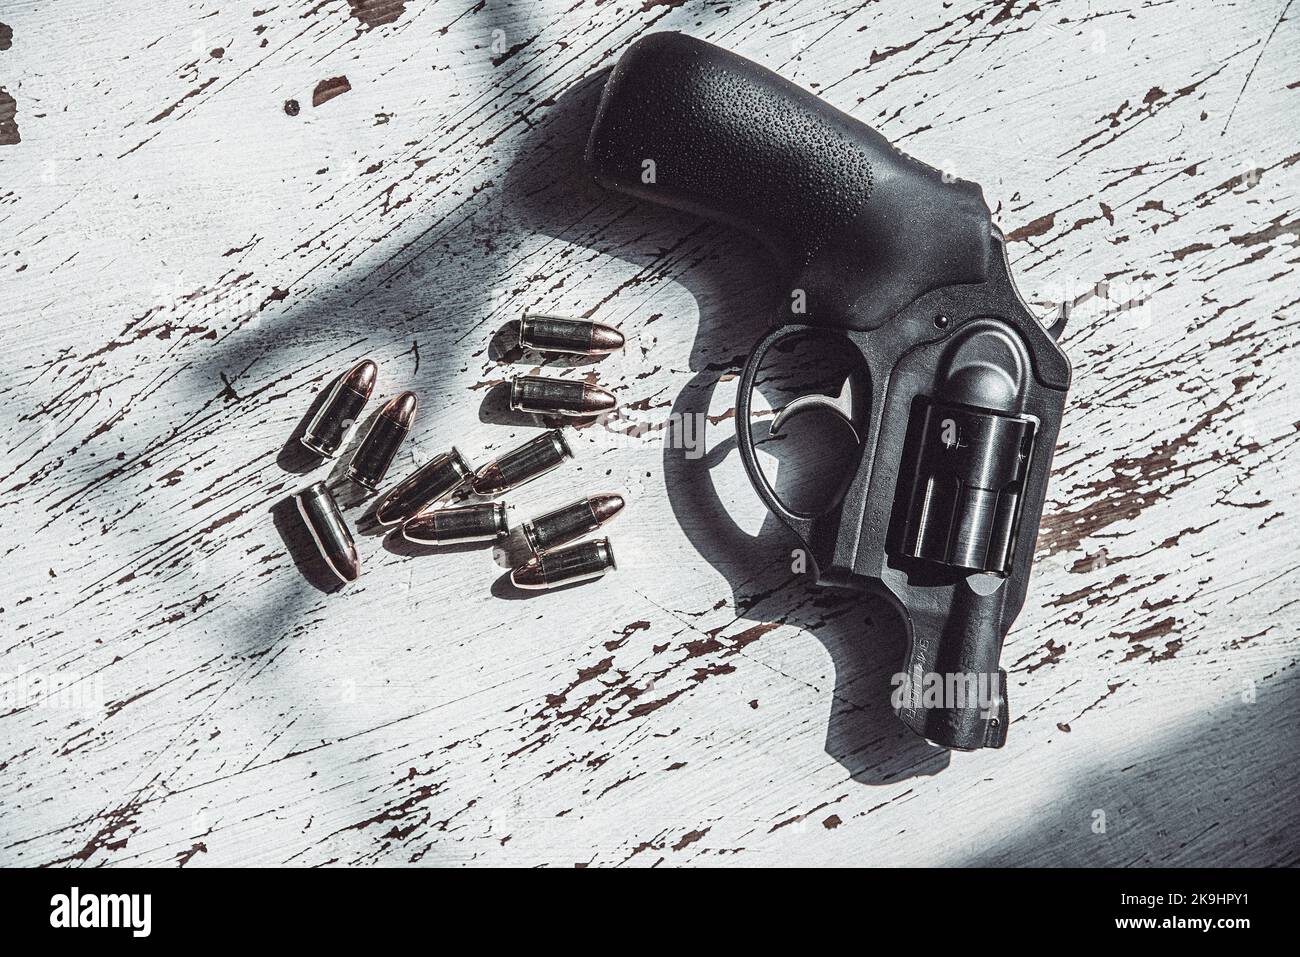 A black, Ruger, 9mm, snub-nosed revolver along with a grouping of 9mm bullets. Stock Photo